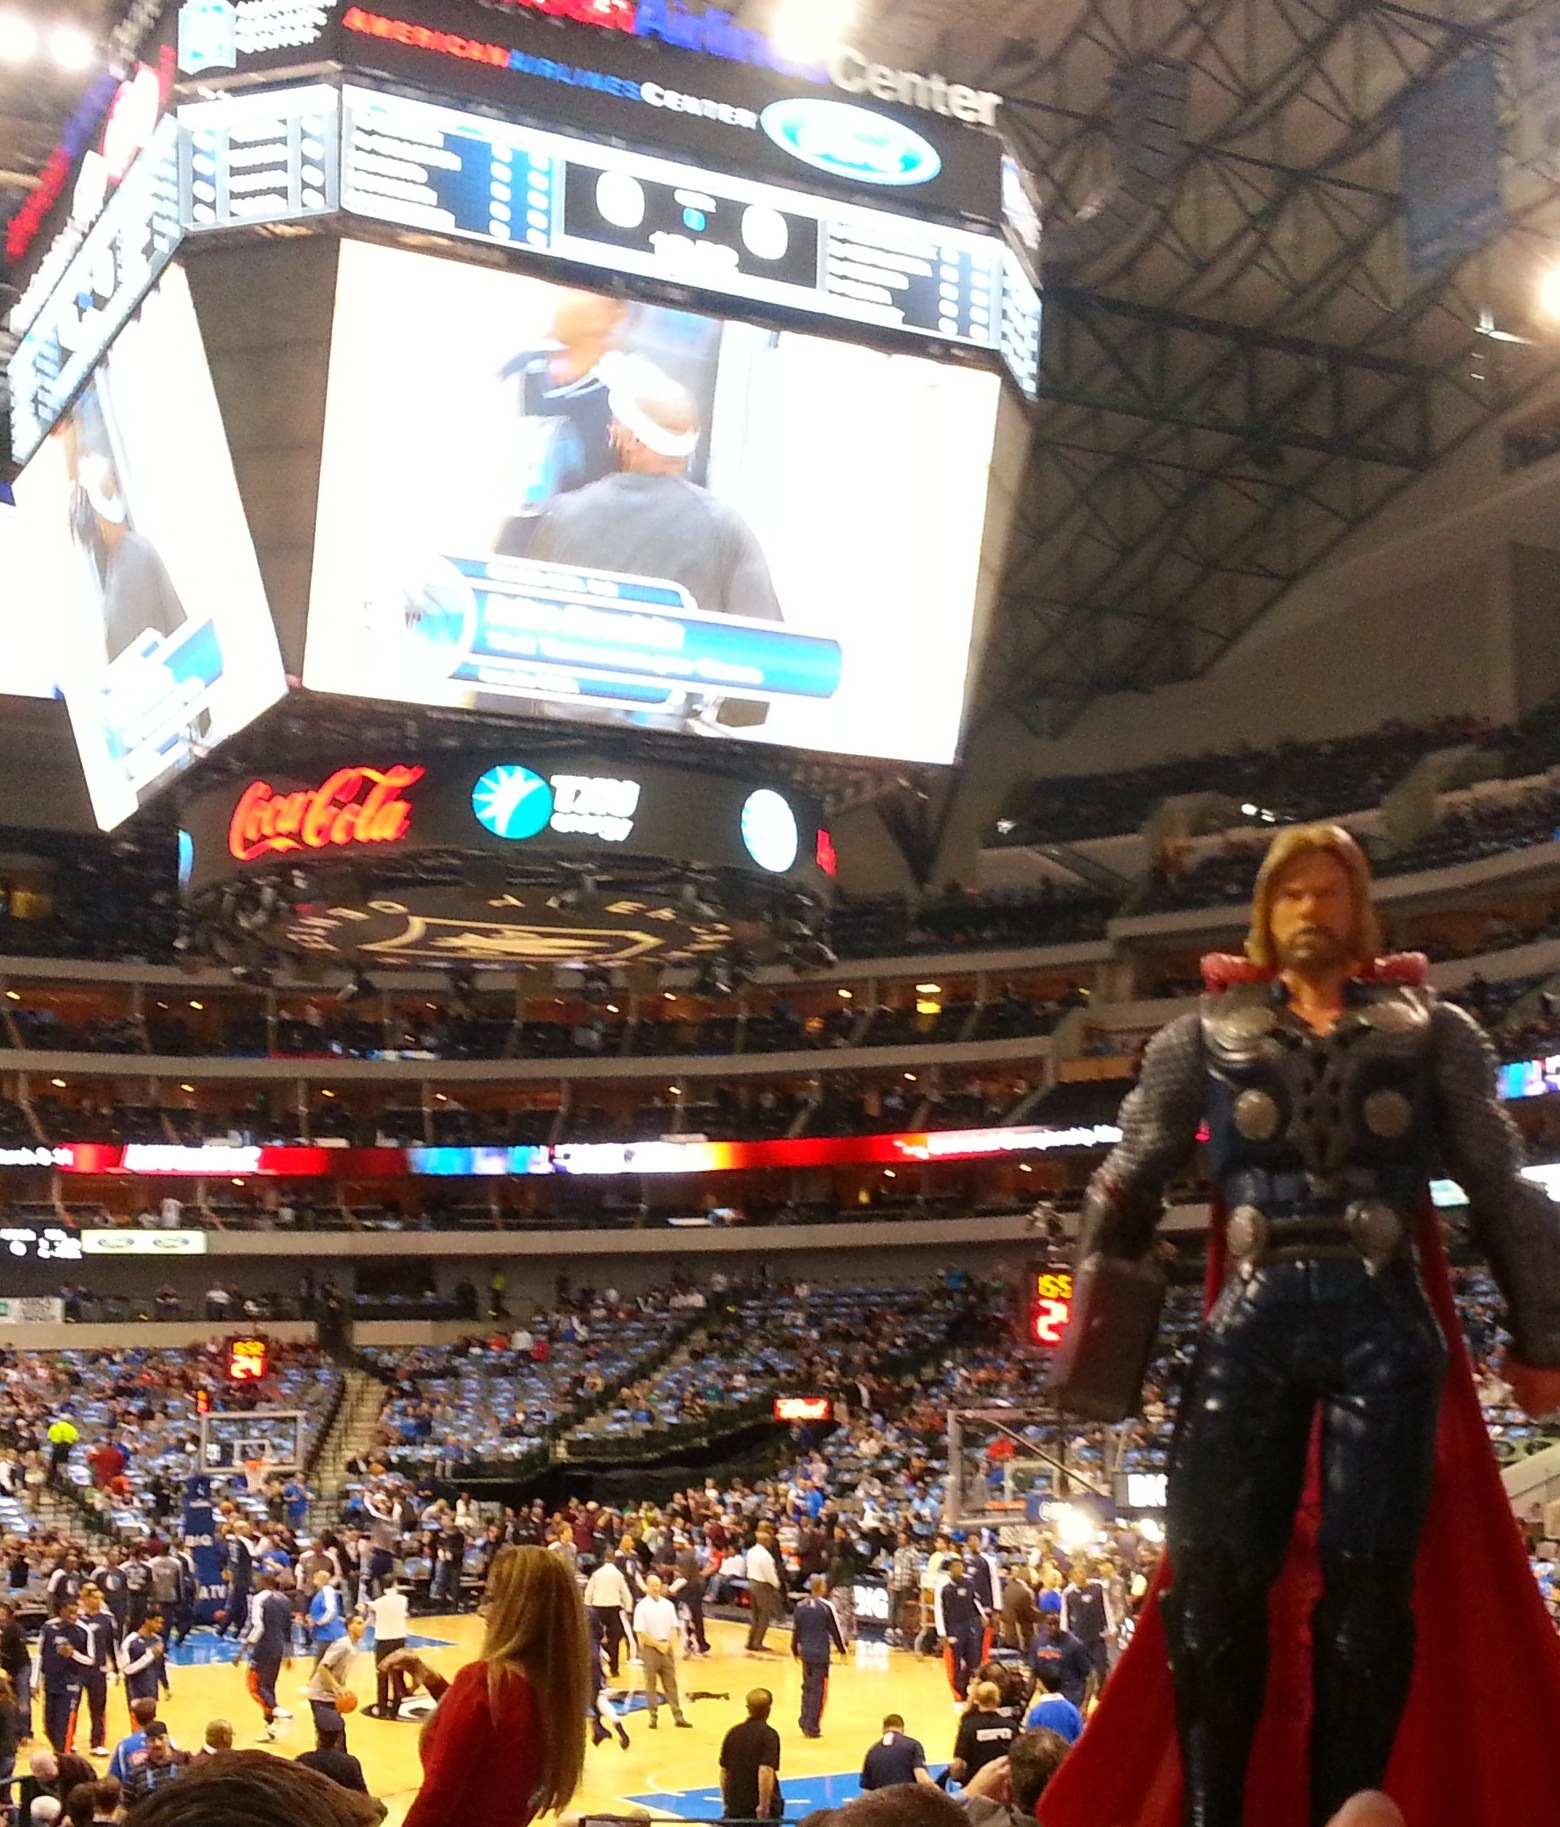 The god of thunder cheered his team to victory.